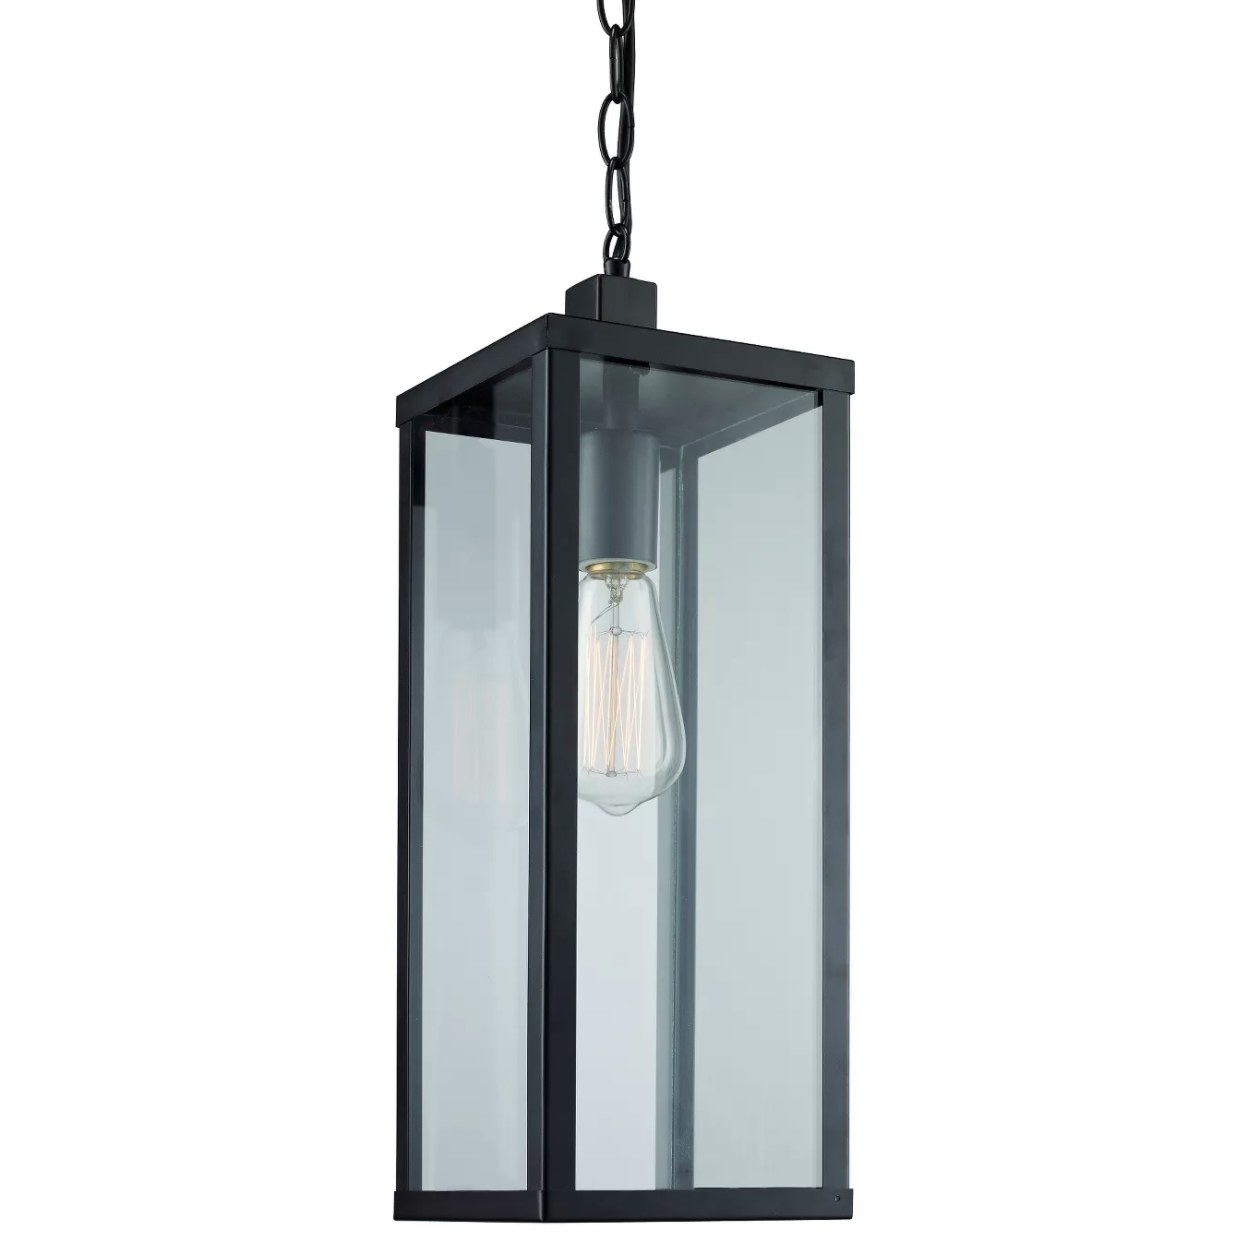 A hanging filament bulb in a rectangular, glass shade with a black frame.